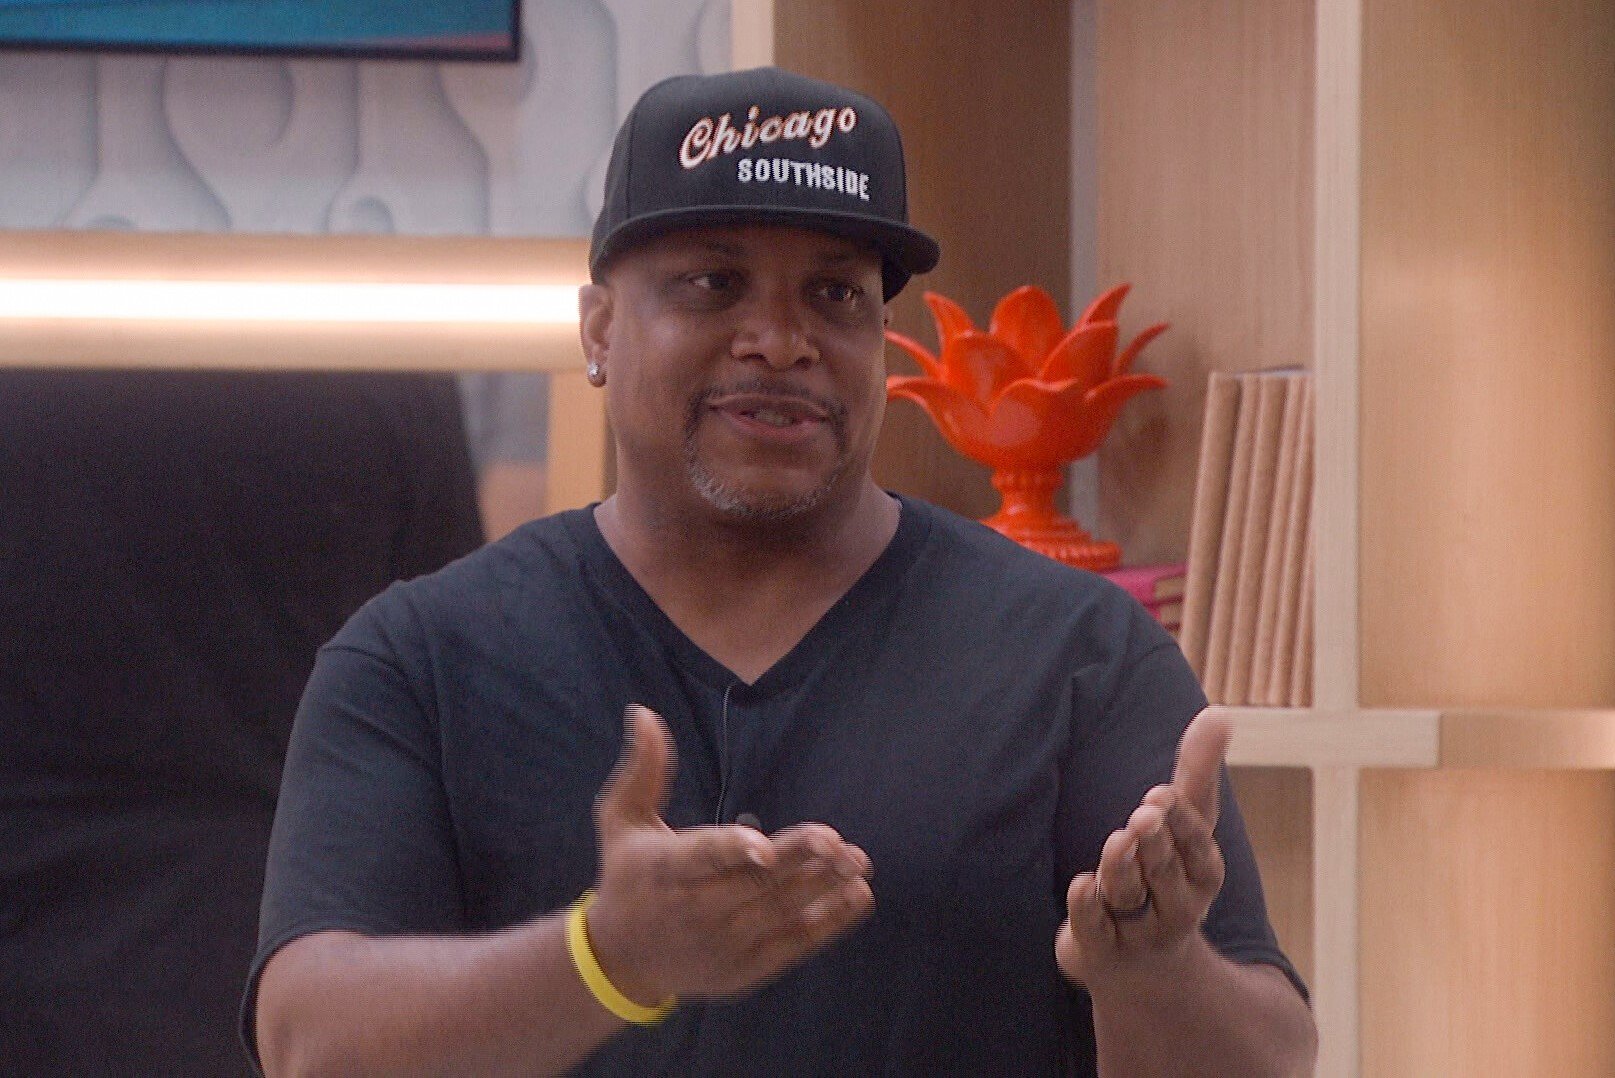 Terrance Higgins, who is a houseguest in 'Big Brother 24' on CBS, wears a black shirt and a black cap that says 'Chicago Southside.'